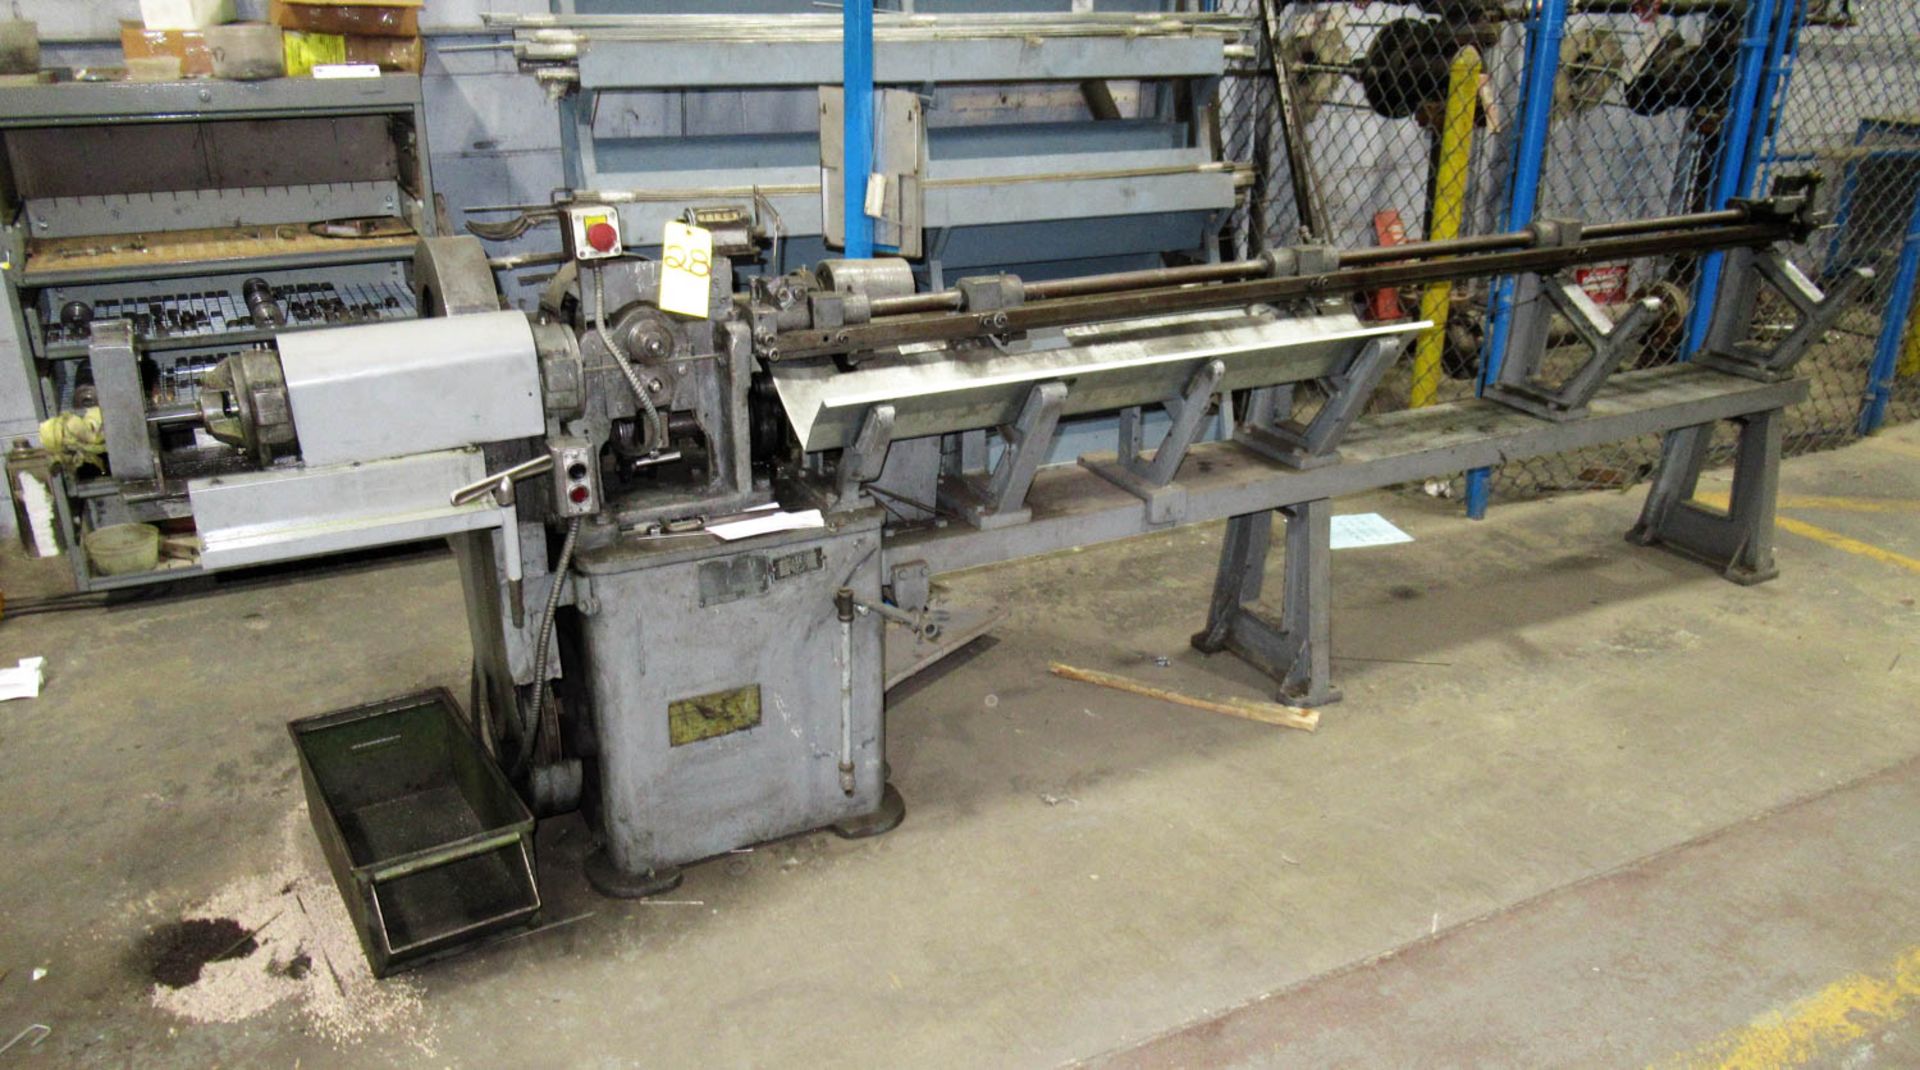 SHUSTER MDL. AWS&C WIRE STRAIGHTENER AND CUT-OFF, 7' RUN-OUT, WITH ASSORTED DIES, S/N: 1A-112